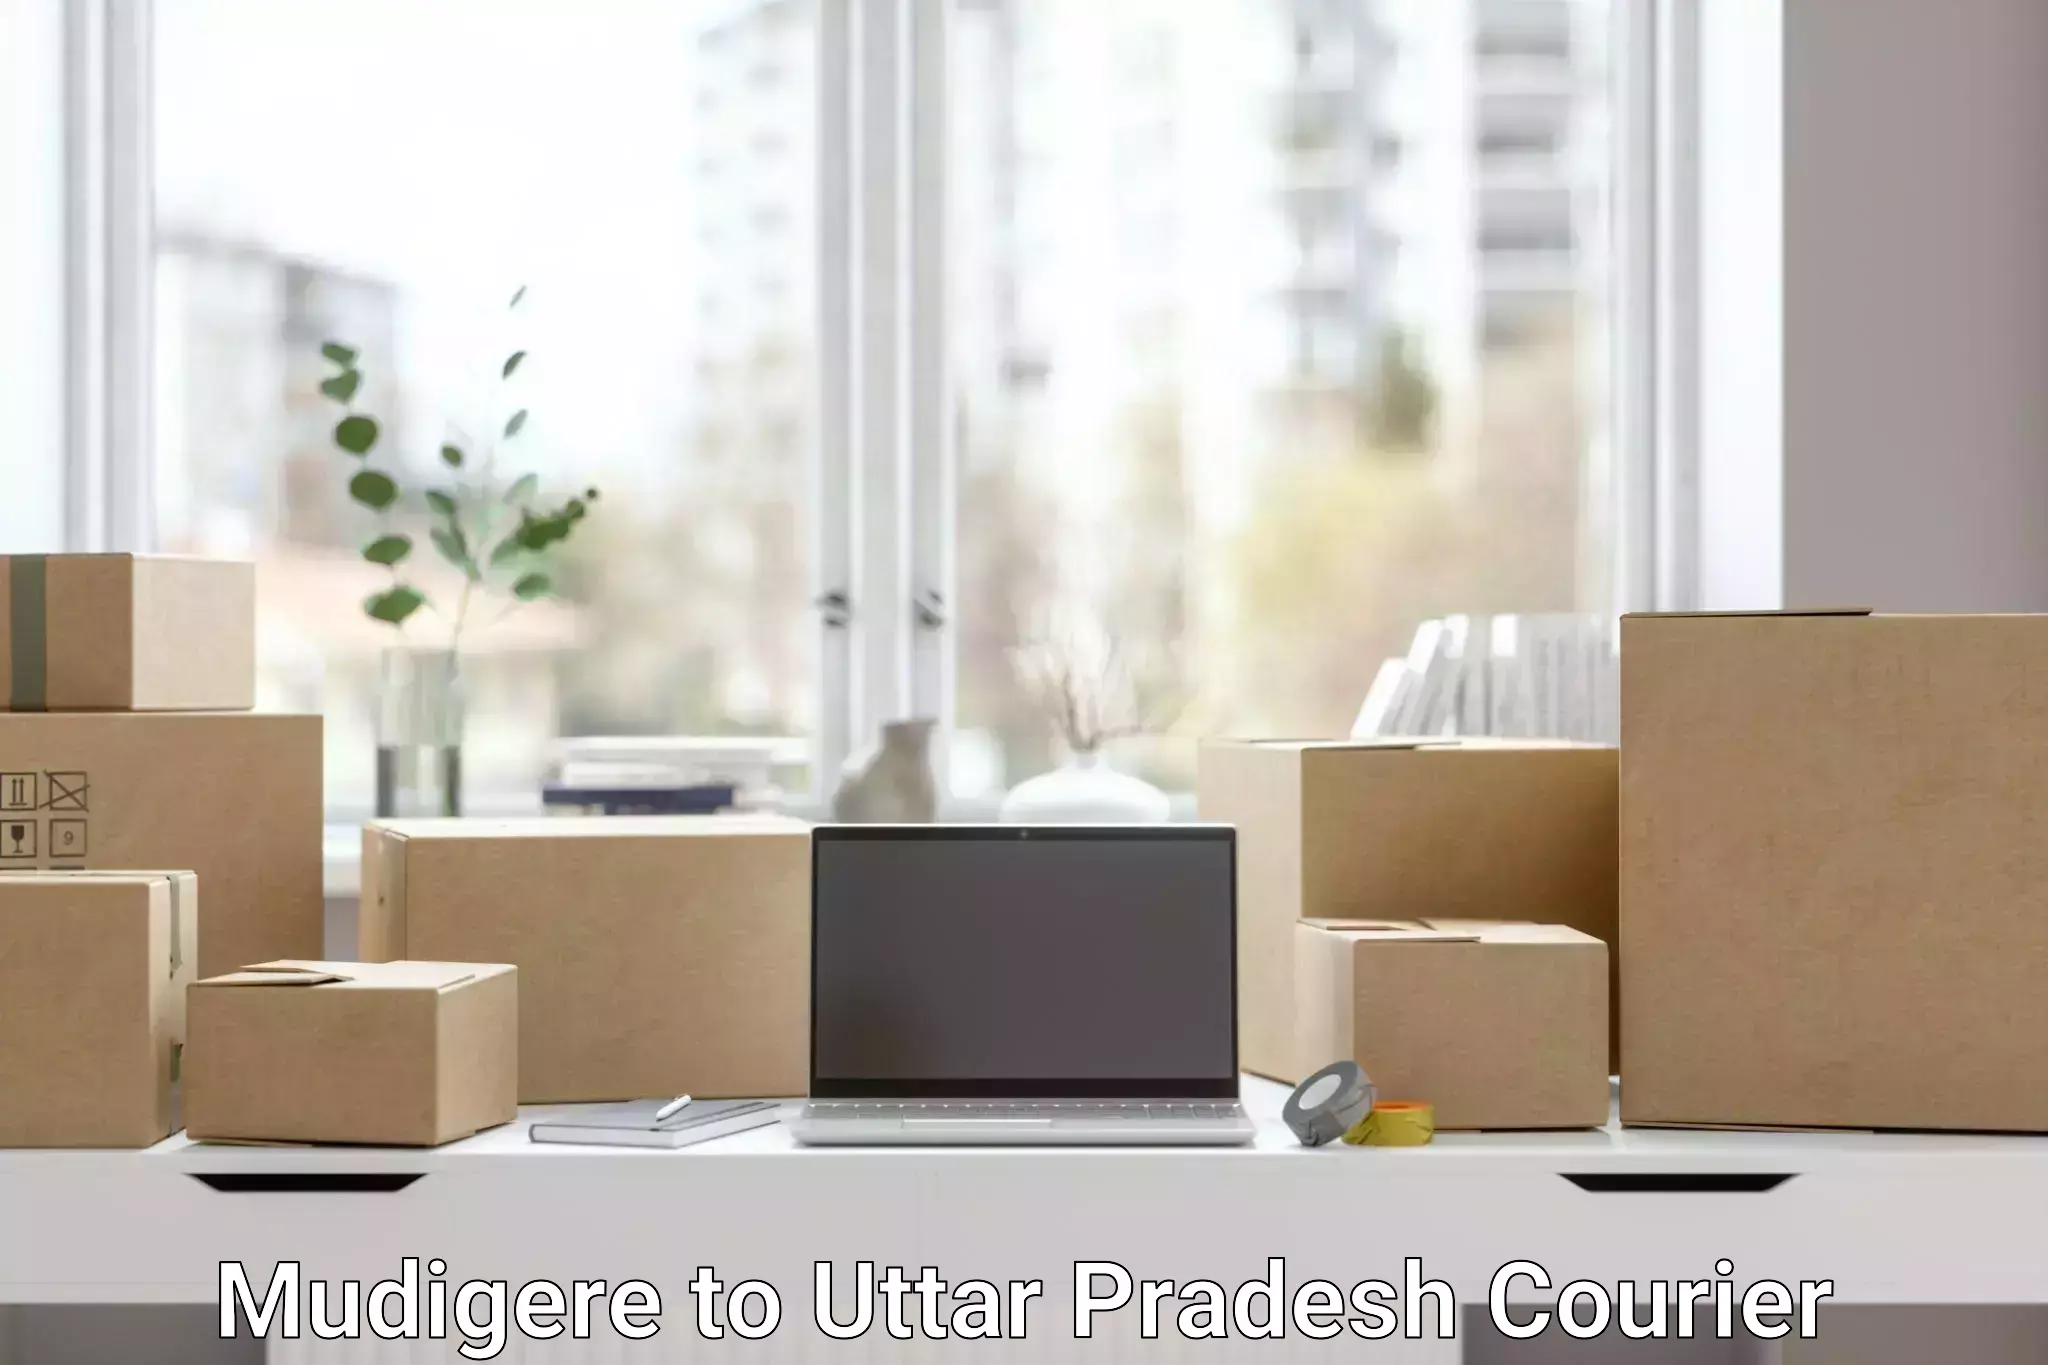 Expedited shipping methods Mudigere to Fatehabad Agra